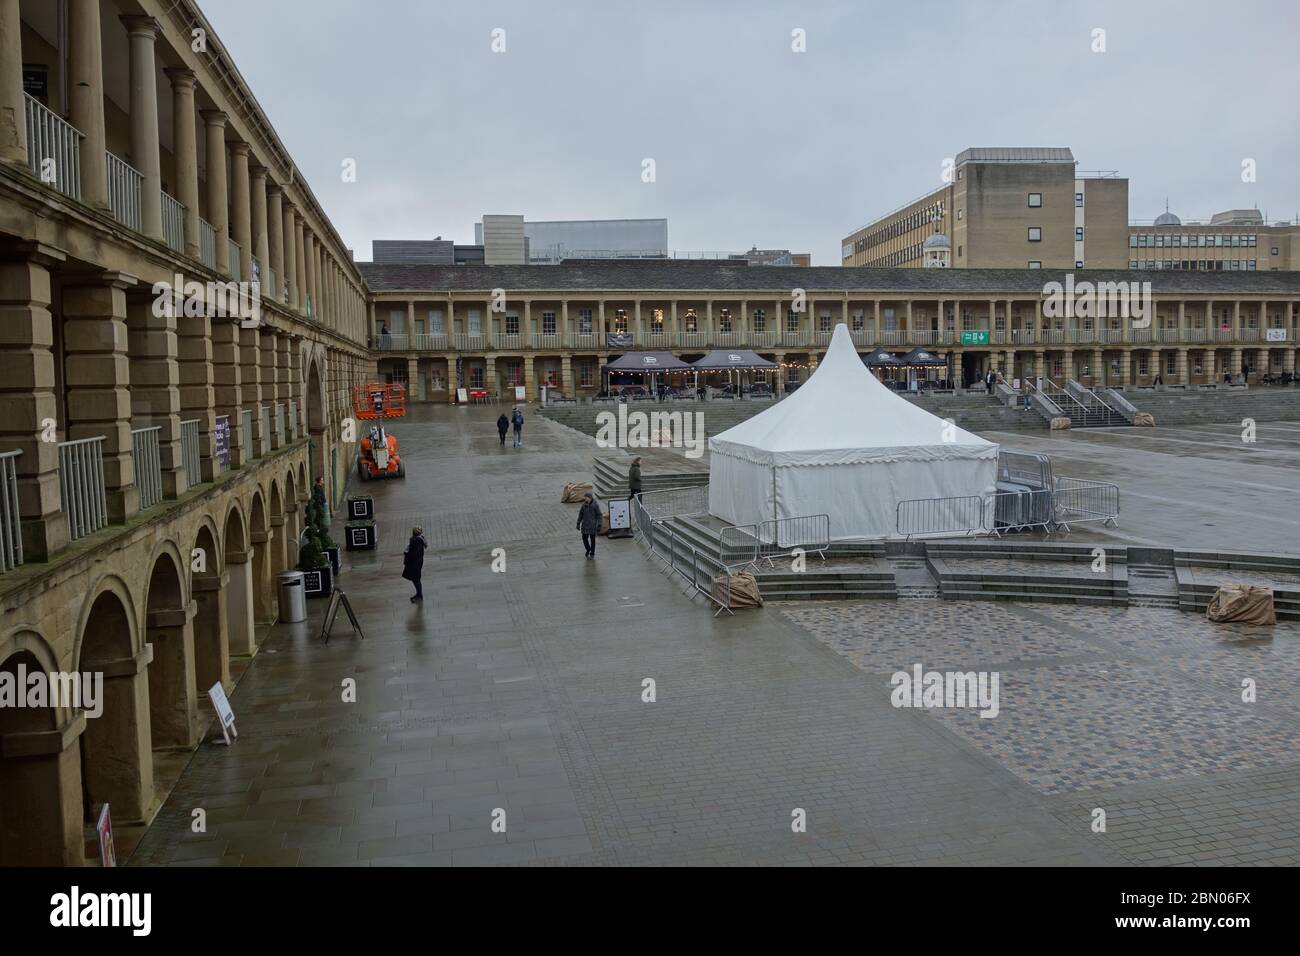 The 18th century Piece Hall in Halifax, West Yorkshire, a Grade I listed building which was reopened in 2017 following a £19m regeneration. Stock Photo